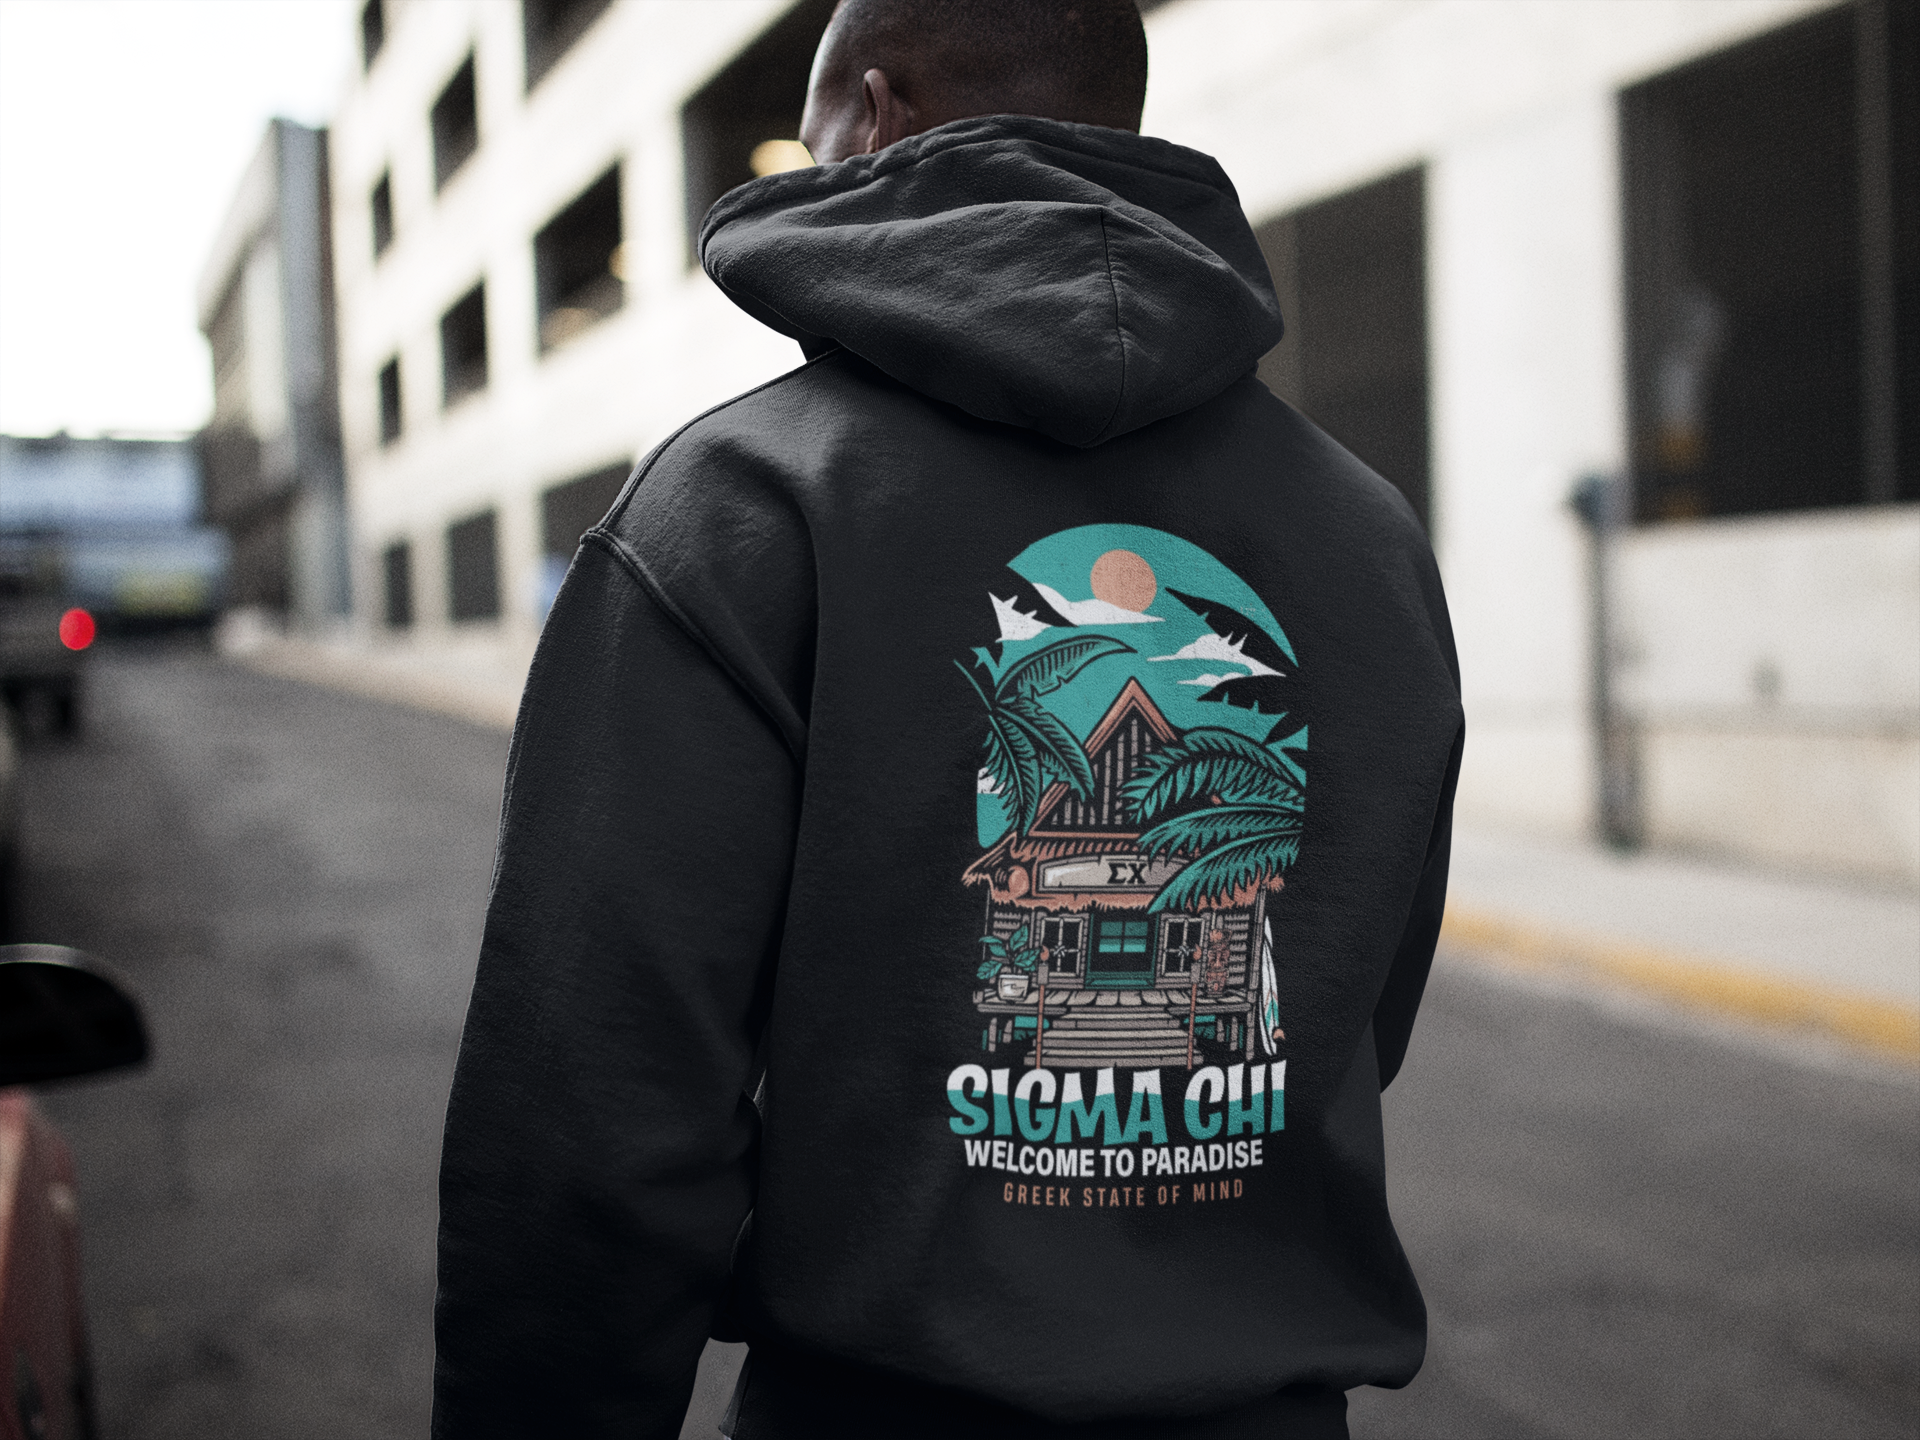 Sigma Chi Graphic Hoodie | Welcome to Paradise | Sigma Chi Fraternity Merch House back model 